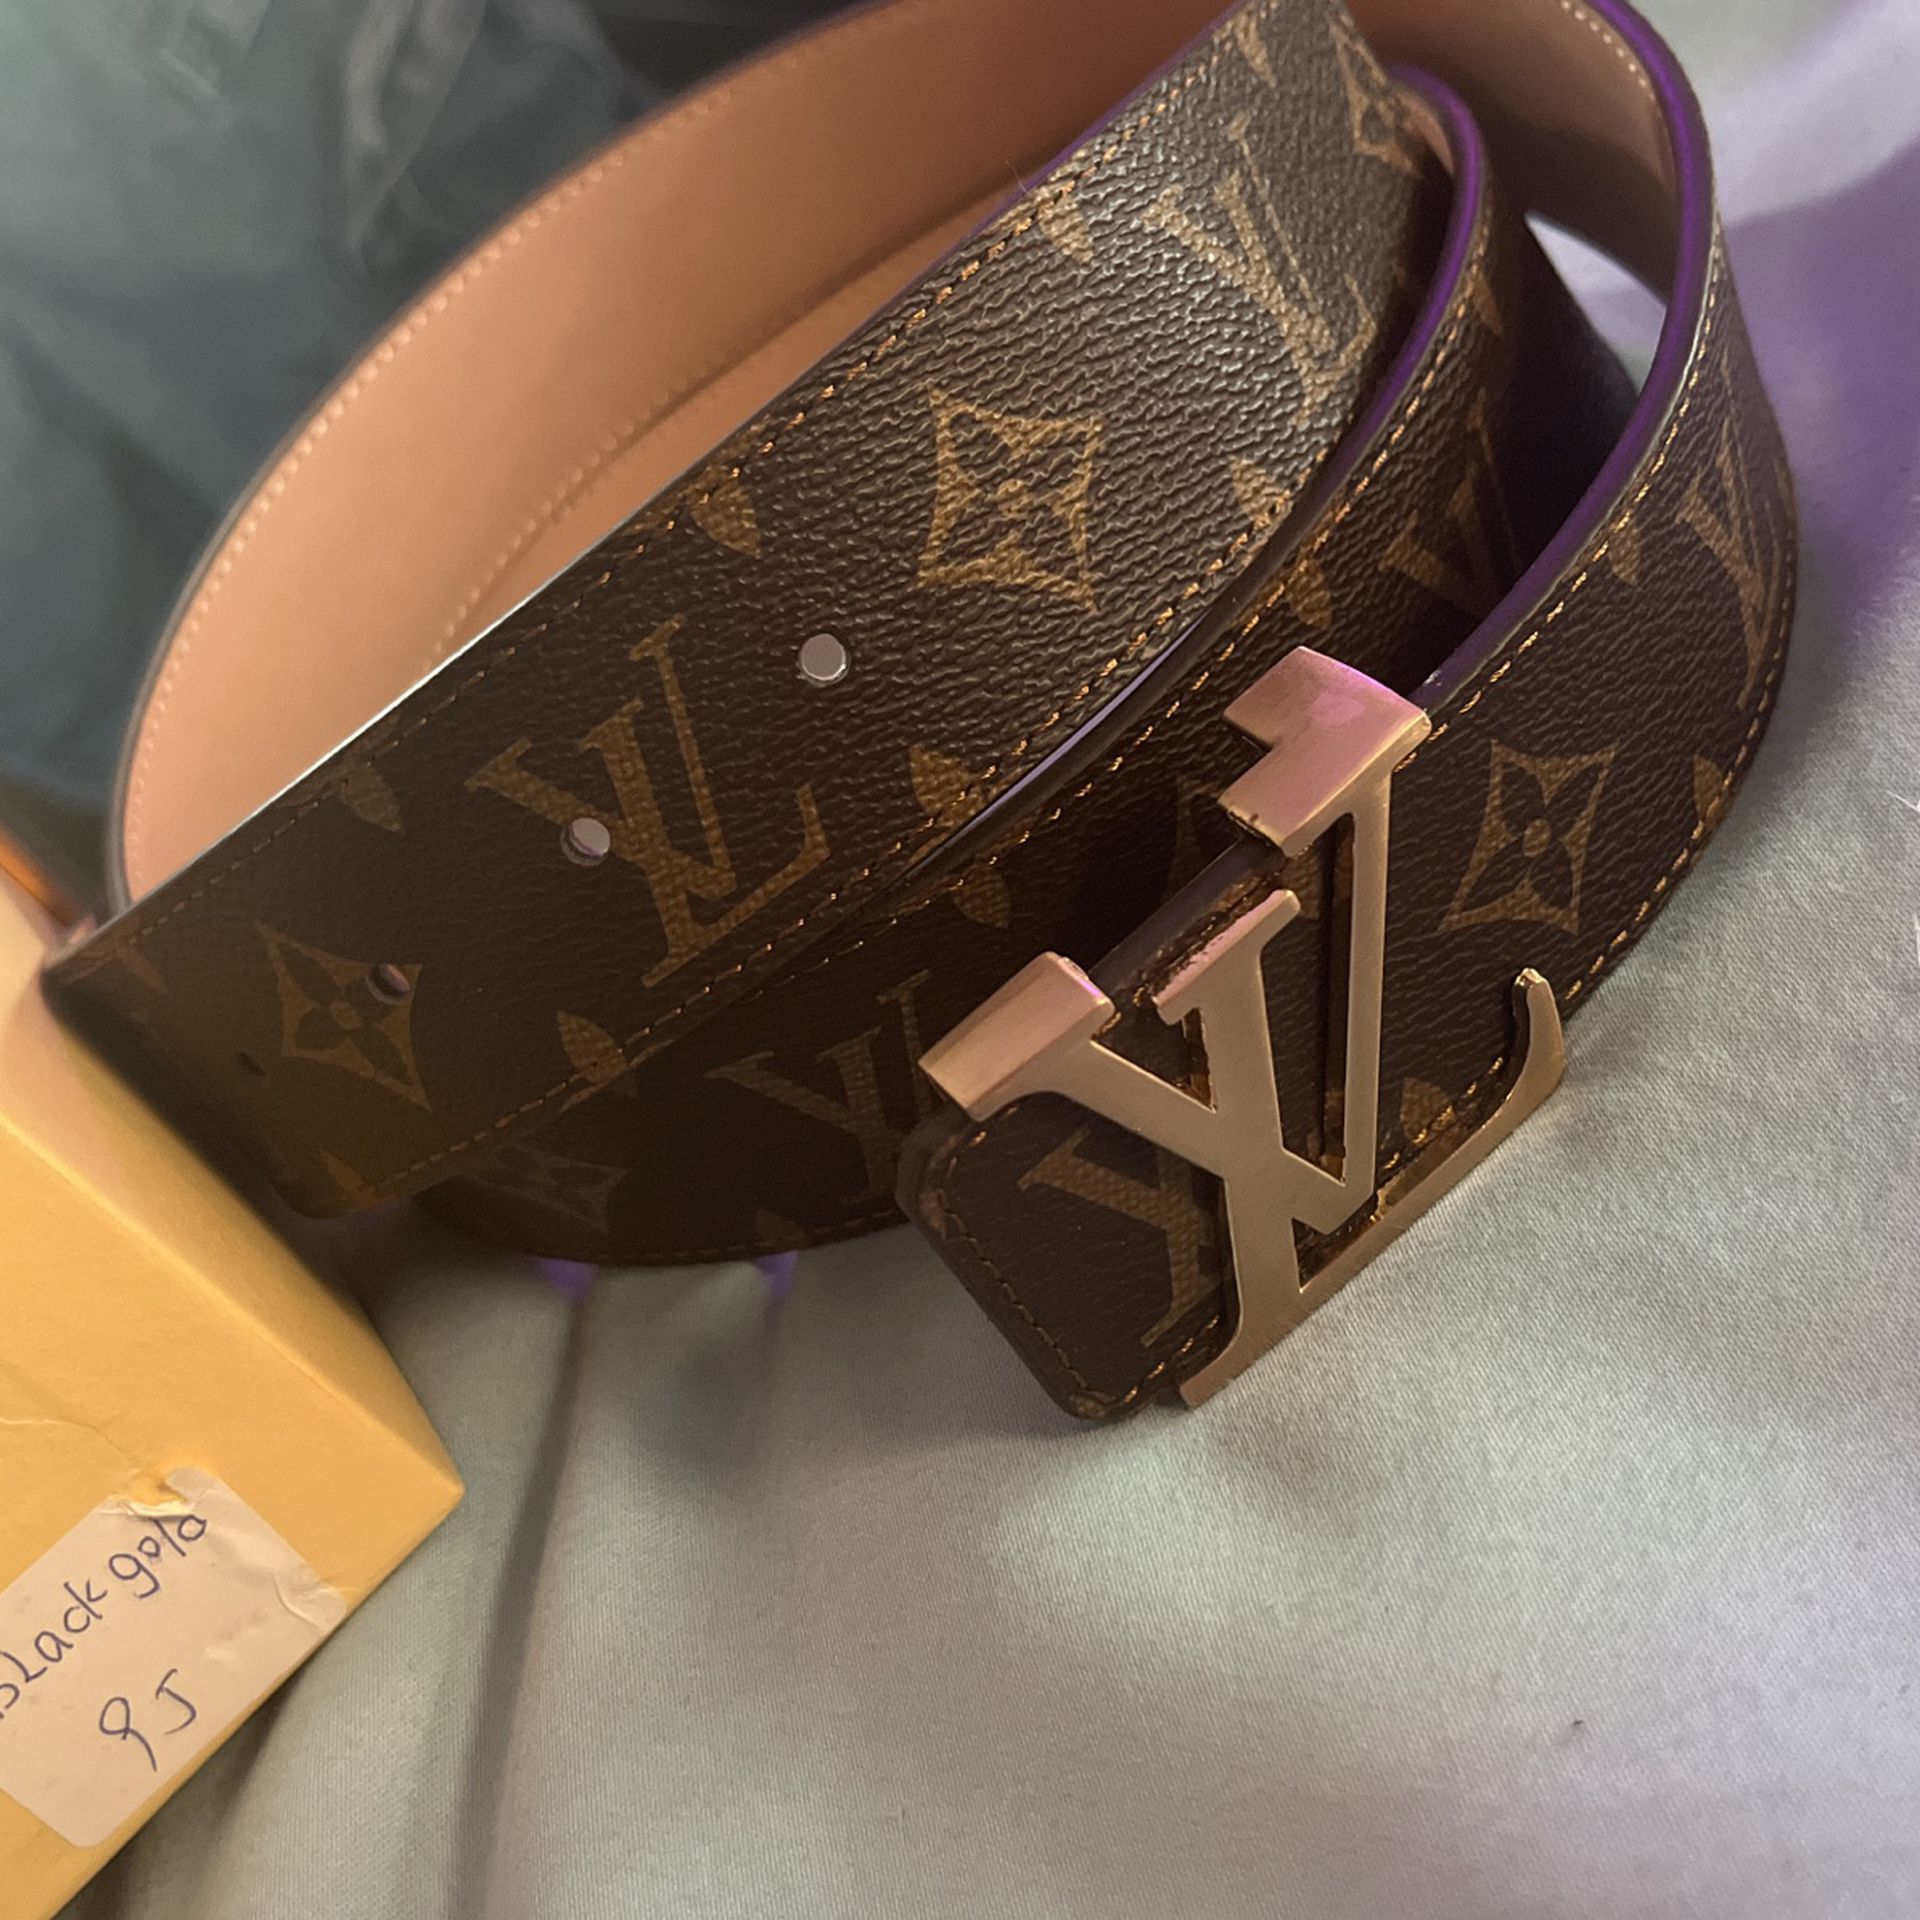 Louis Vuitton Black and Gold Belt 44/110 for Sale in Cumming, GA - OfferUp